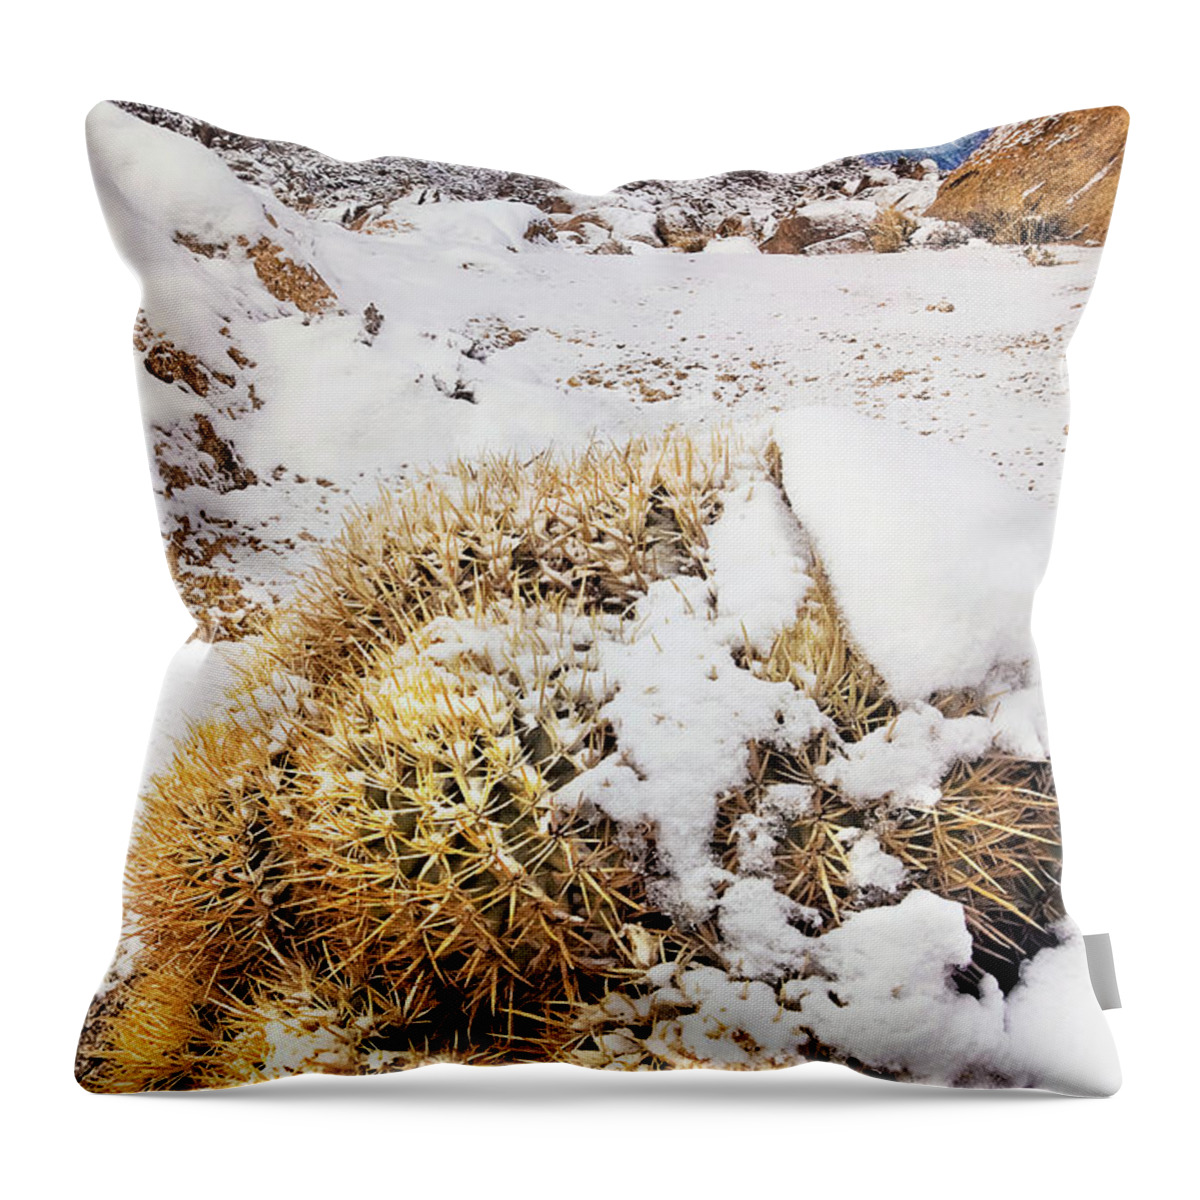 Dave Welling Throw Pillow featuring the photograph Snow On Cactus Alabama Hills Eastern Sierras California by Dave Welling